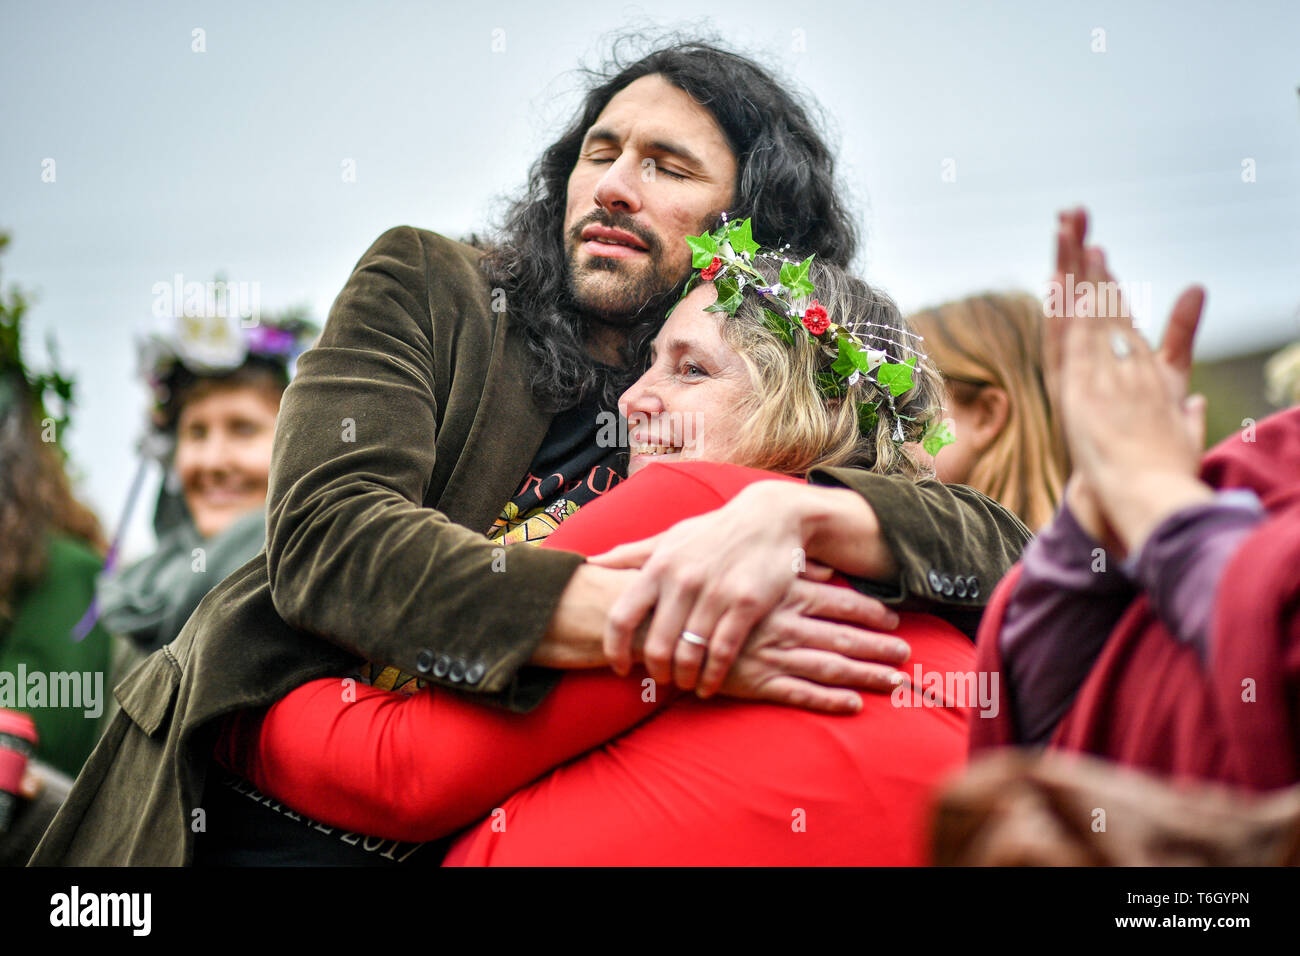 People hug during the Beltane celebrations at Glastonbury Chalice Well, where people gather to observe a modern interpretation of the ancient Celtic pagan fertility rite of Spring. Stock Photo